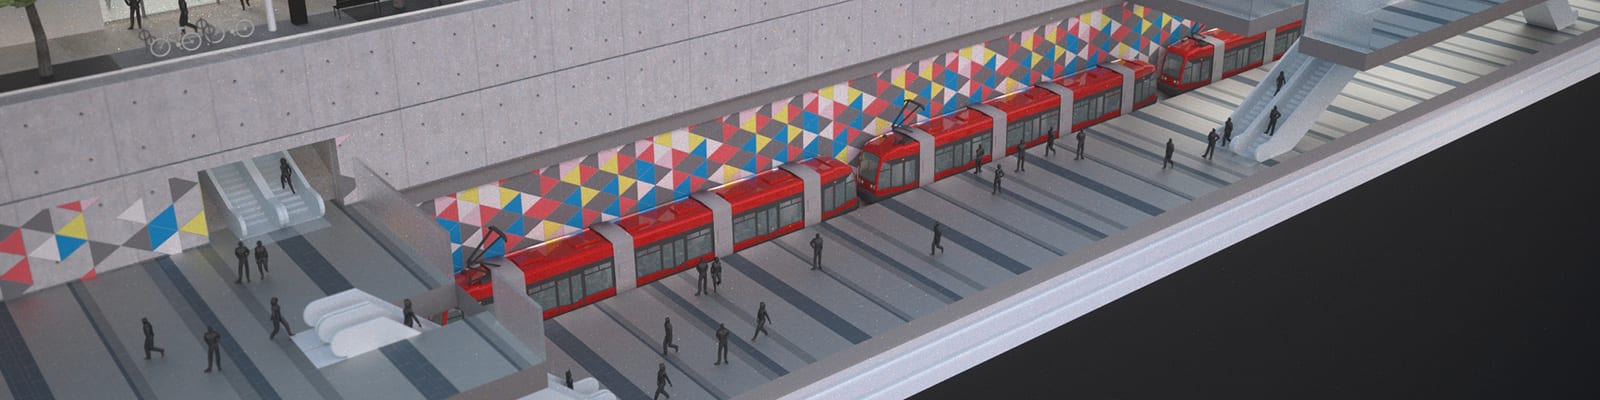 Rendering of the platforms along the Eglinton Crosstown.